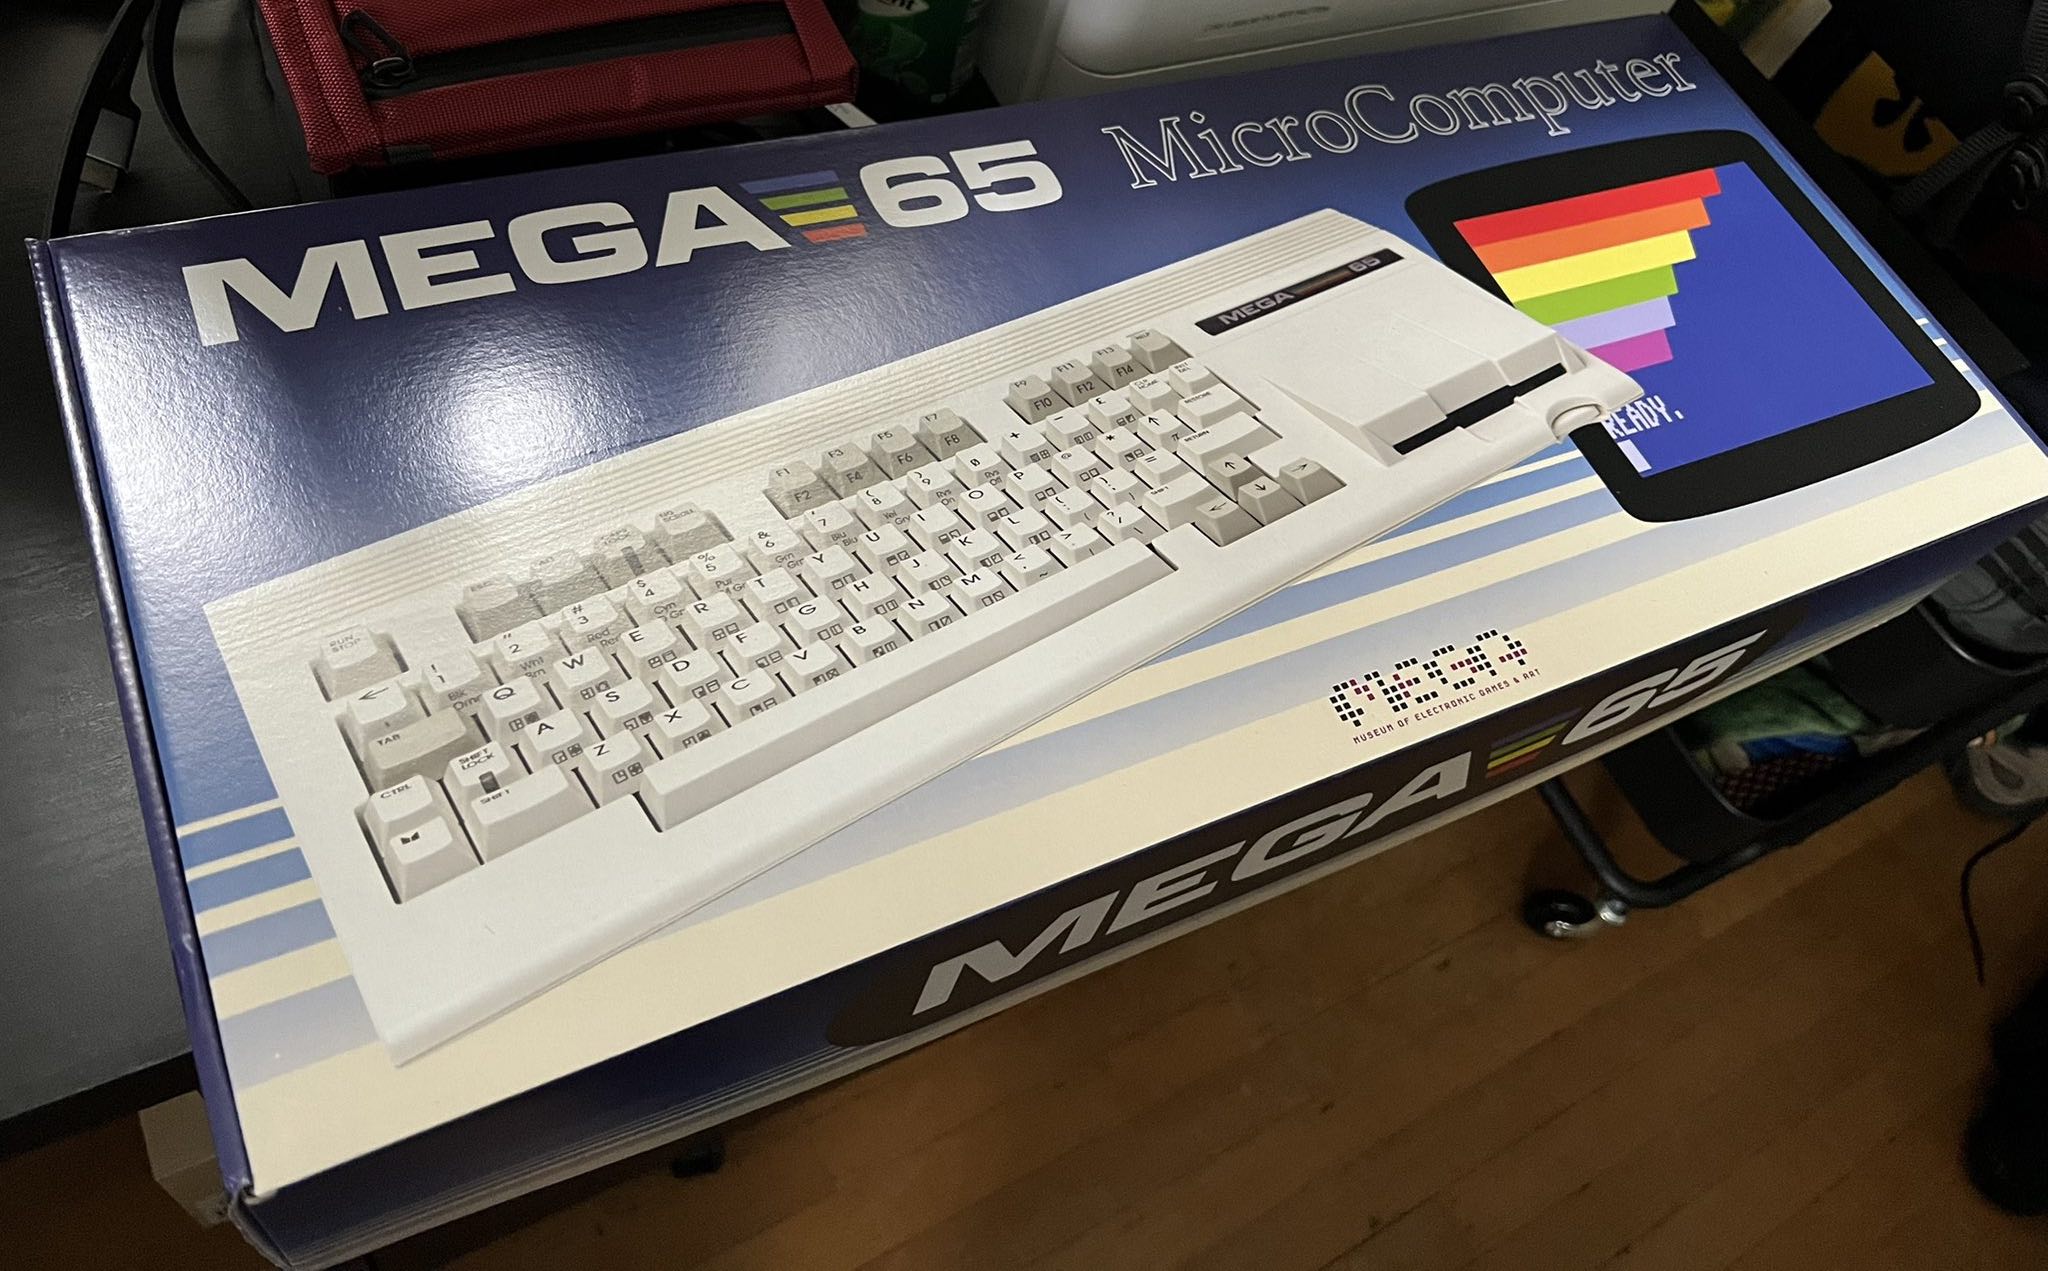 Retail packaging for the MEGA65